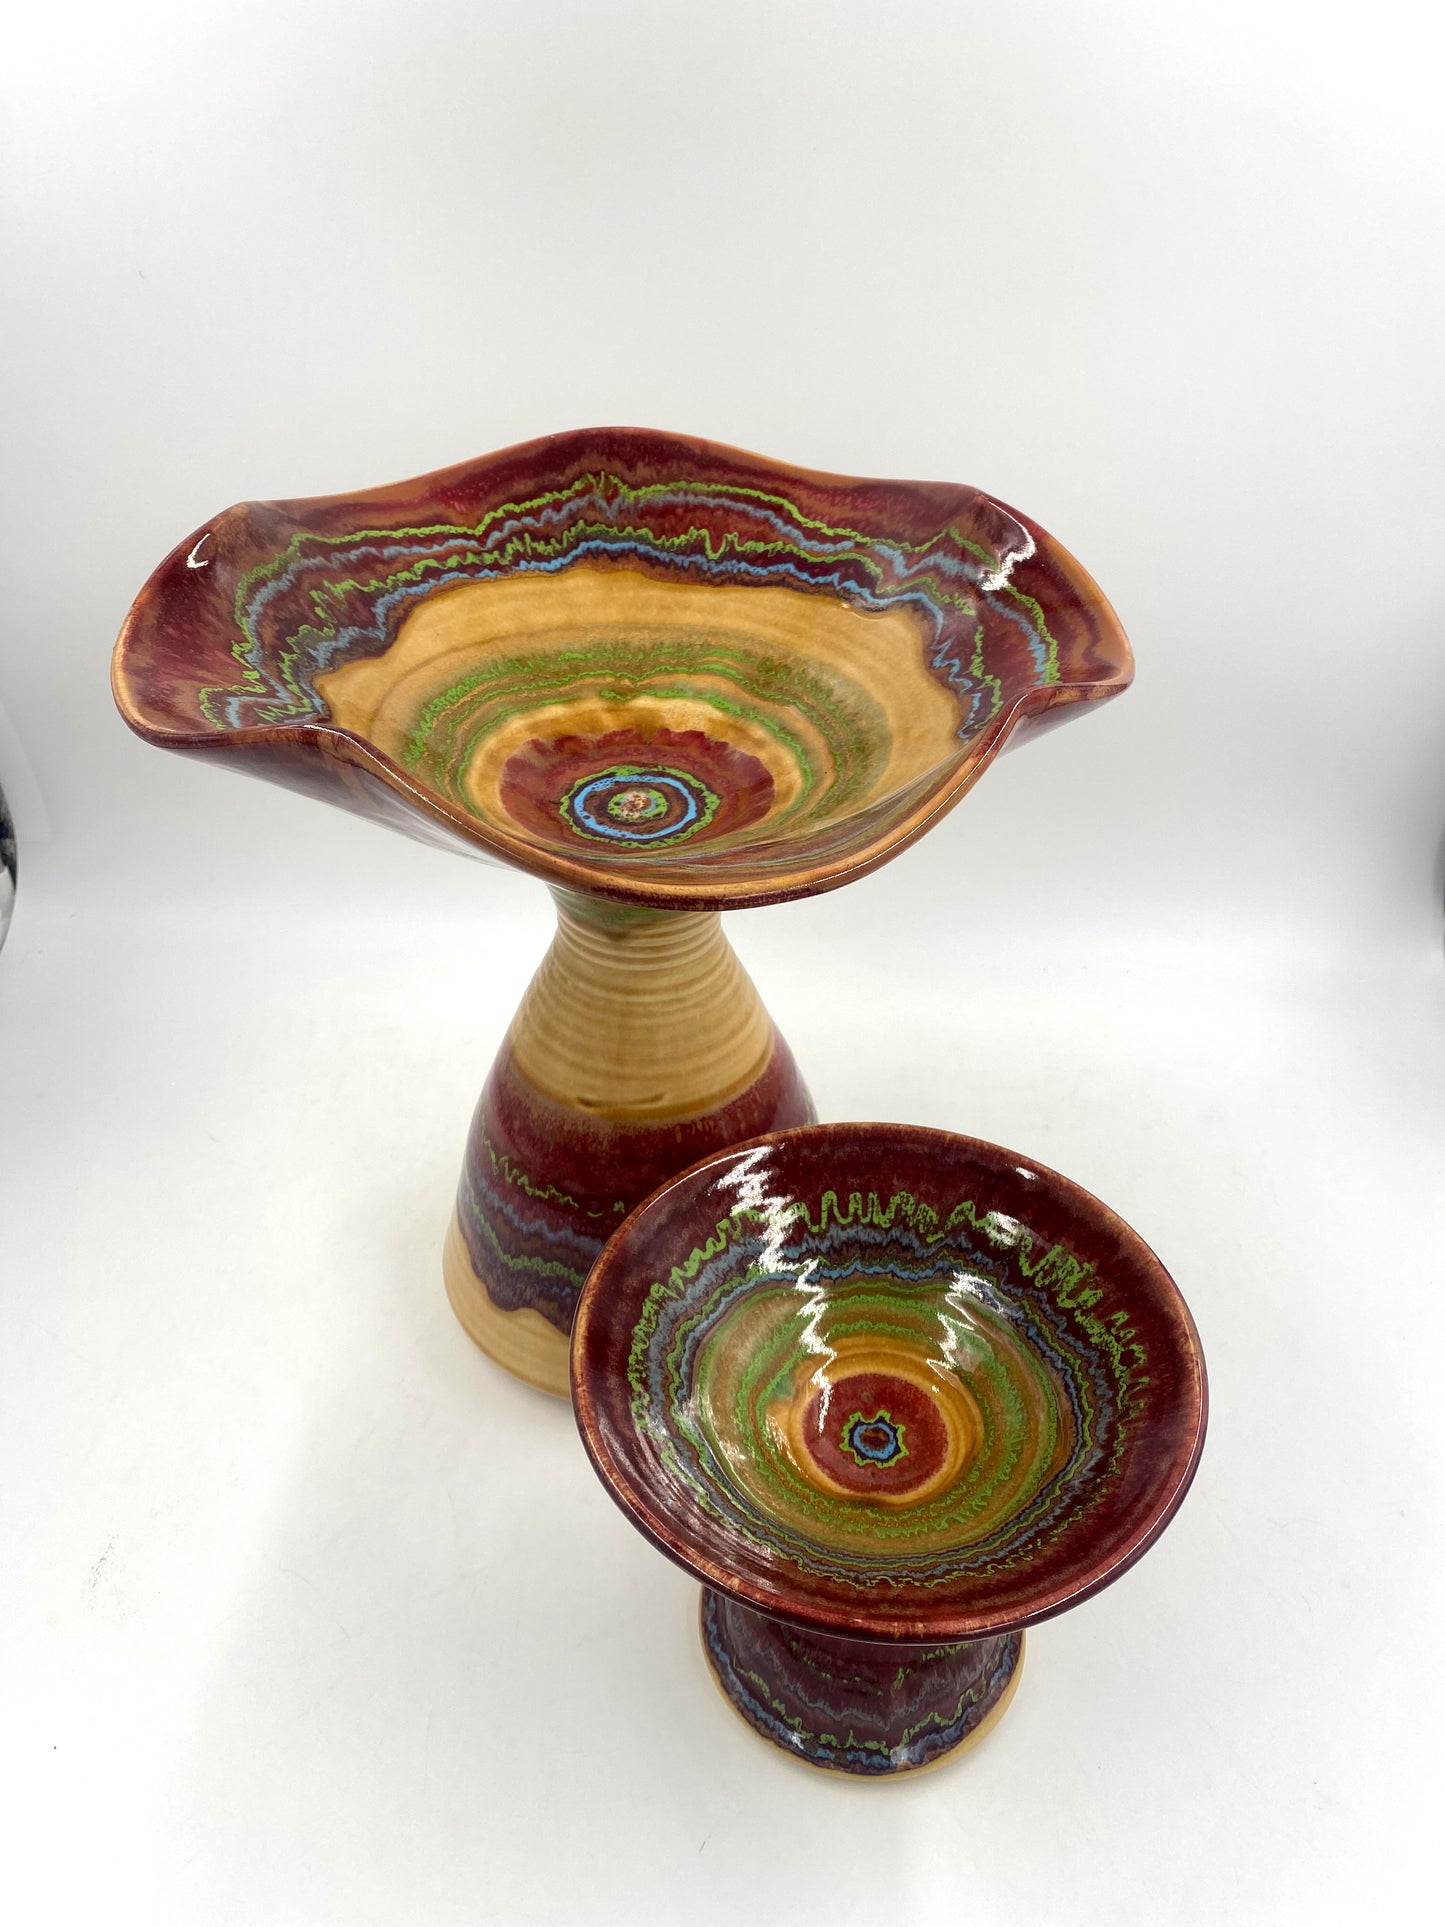 Spanish Compote Bowl